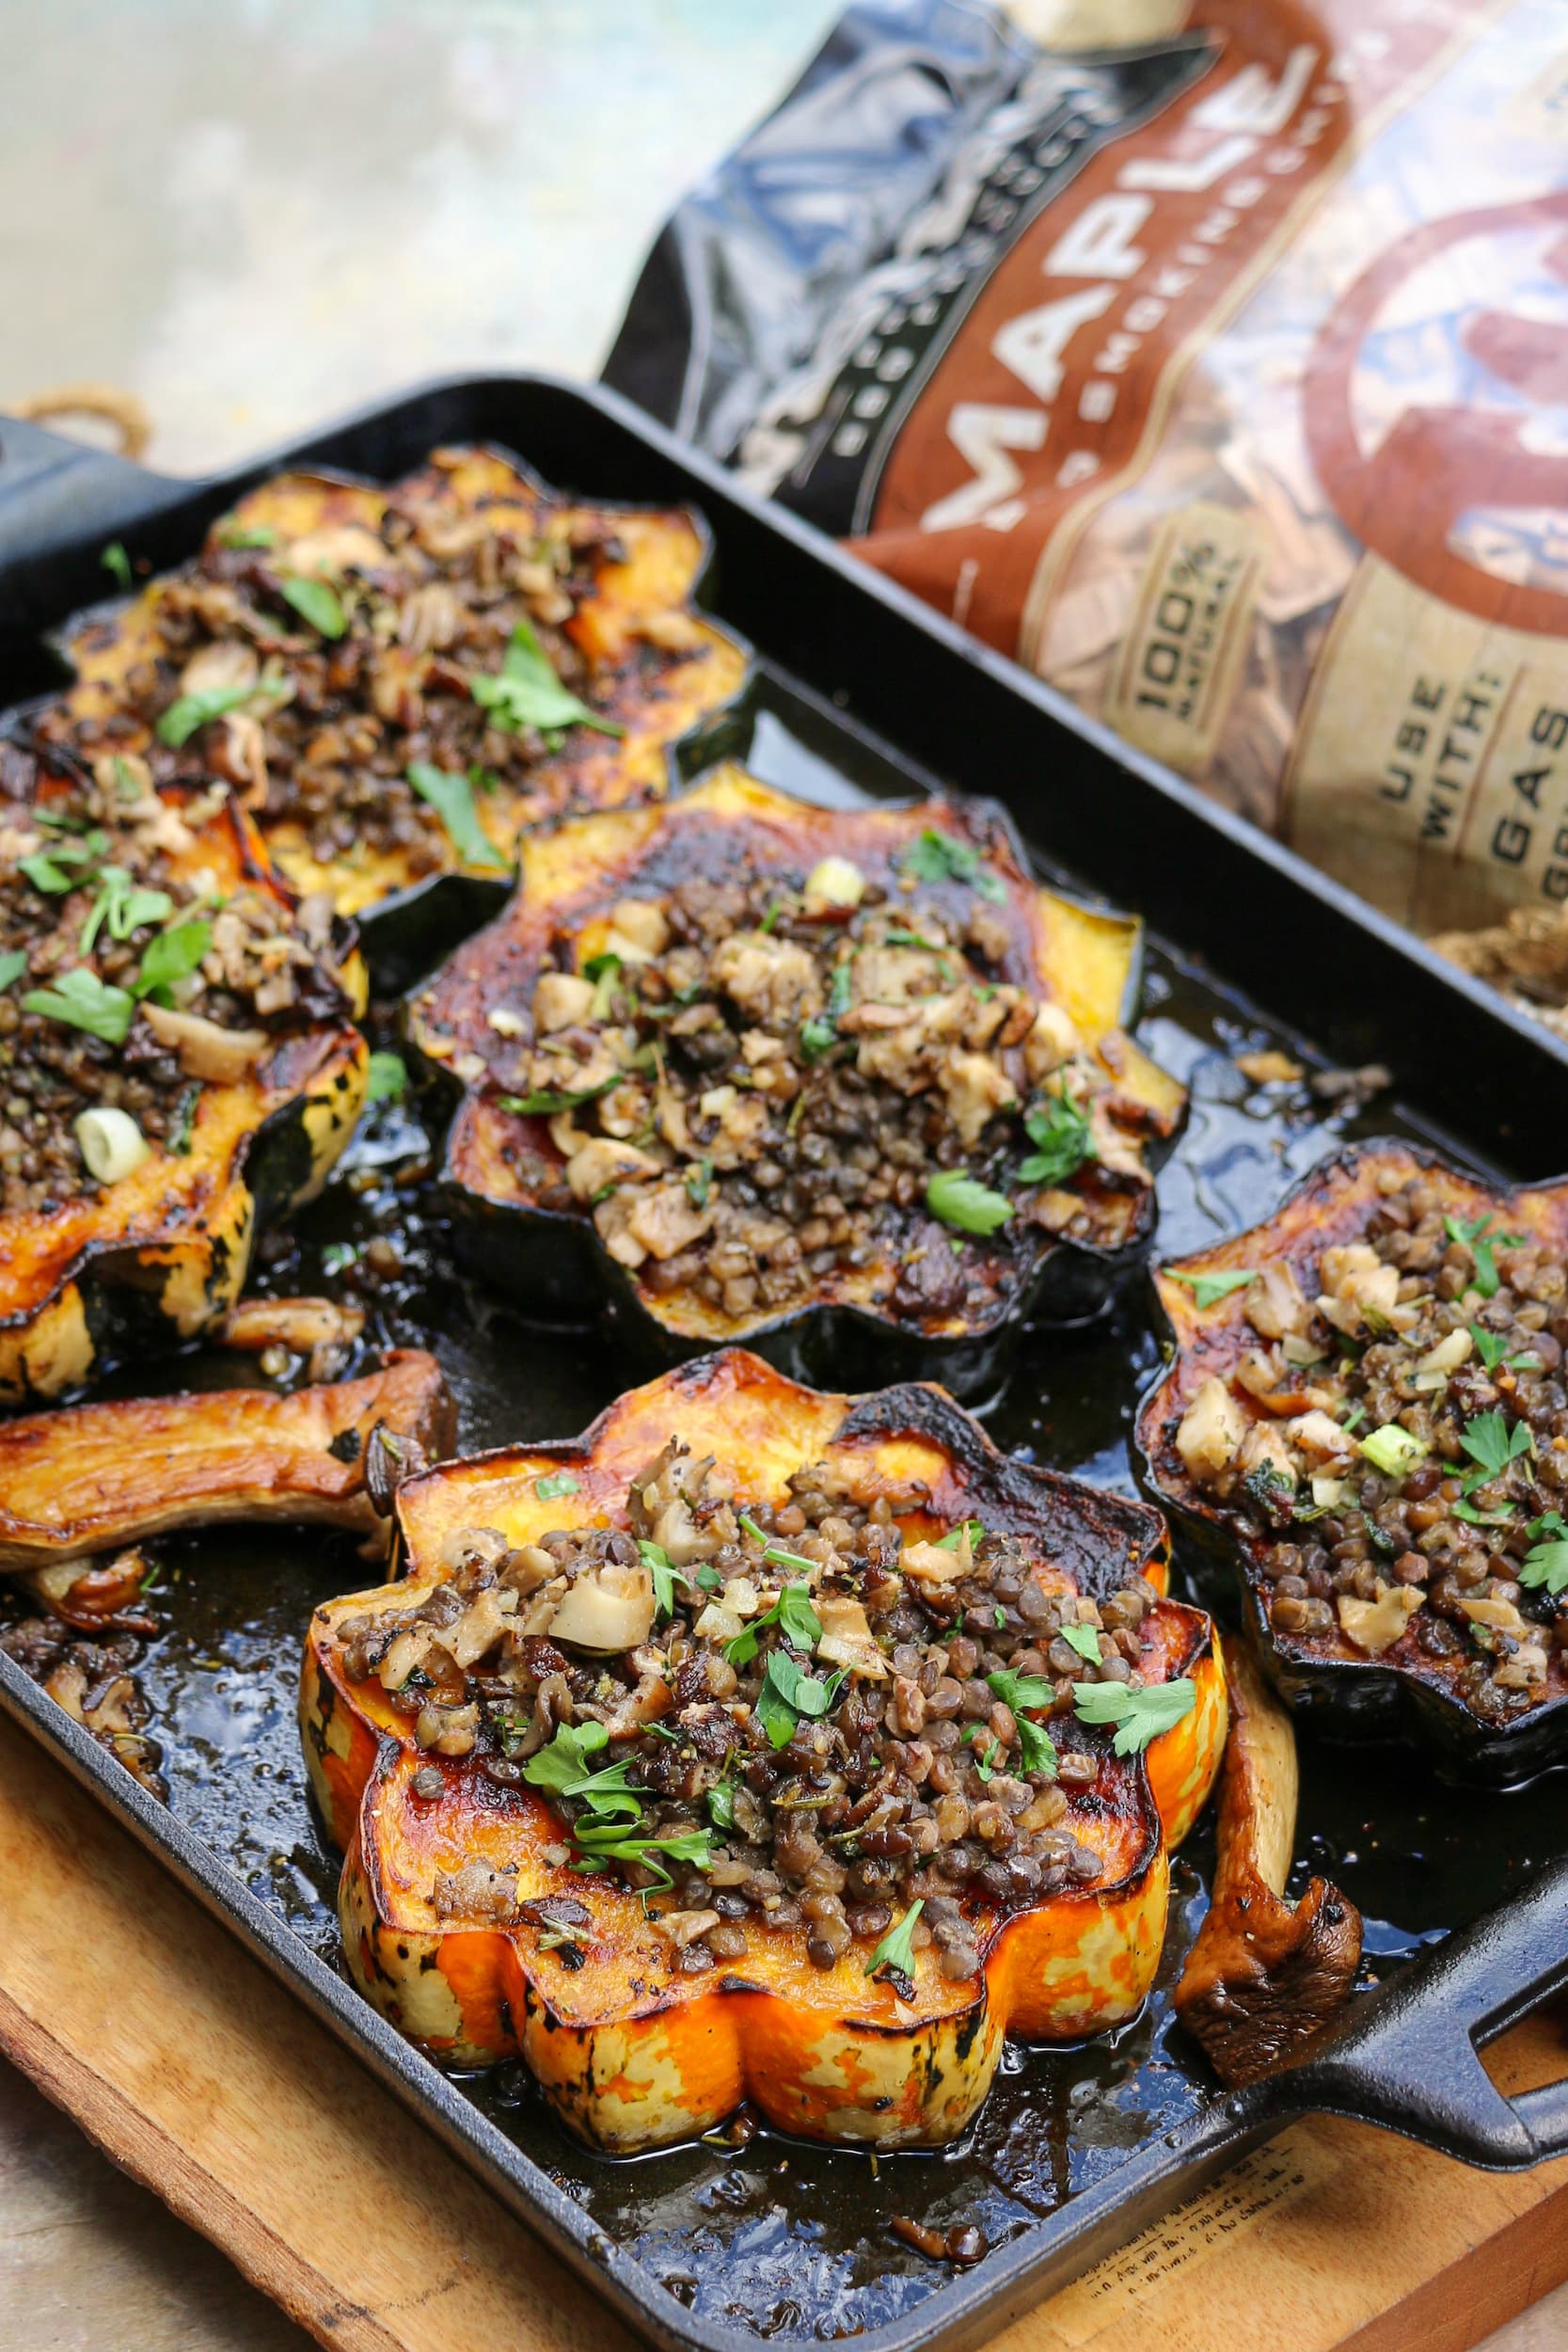 Grilled acorn squash topped with mushrooms and lentils next to a bag of Western Maple BBQ Smoking Chips